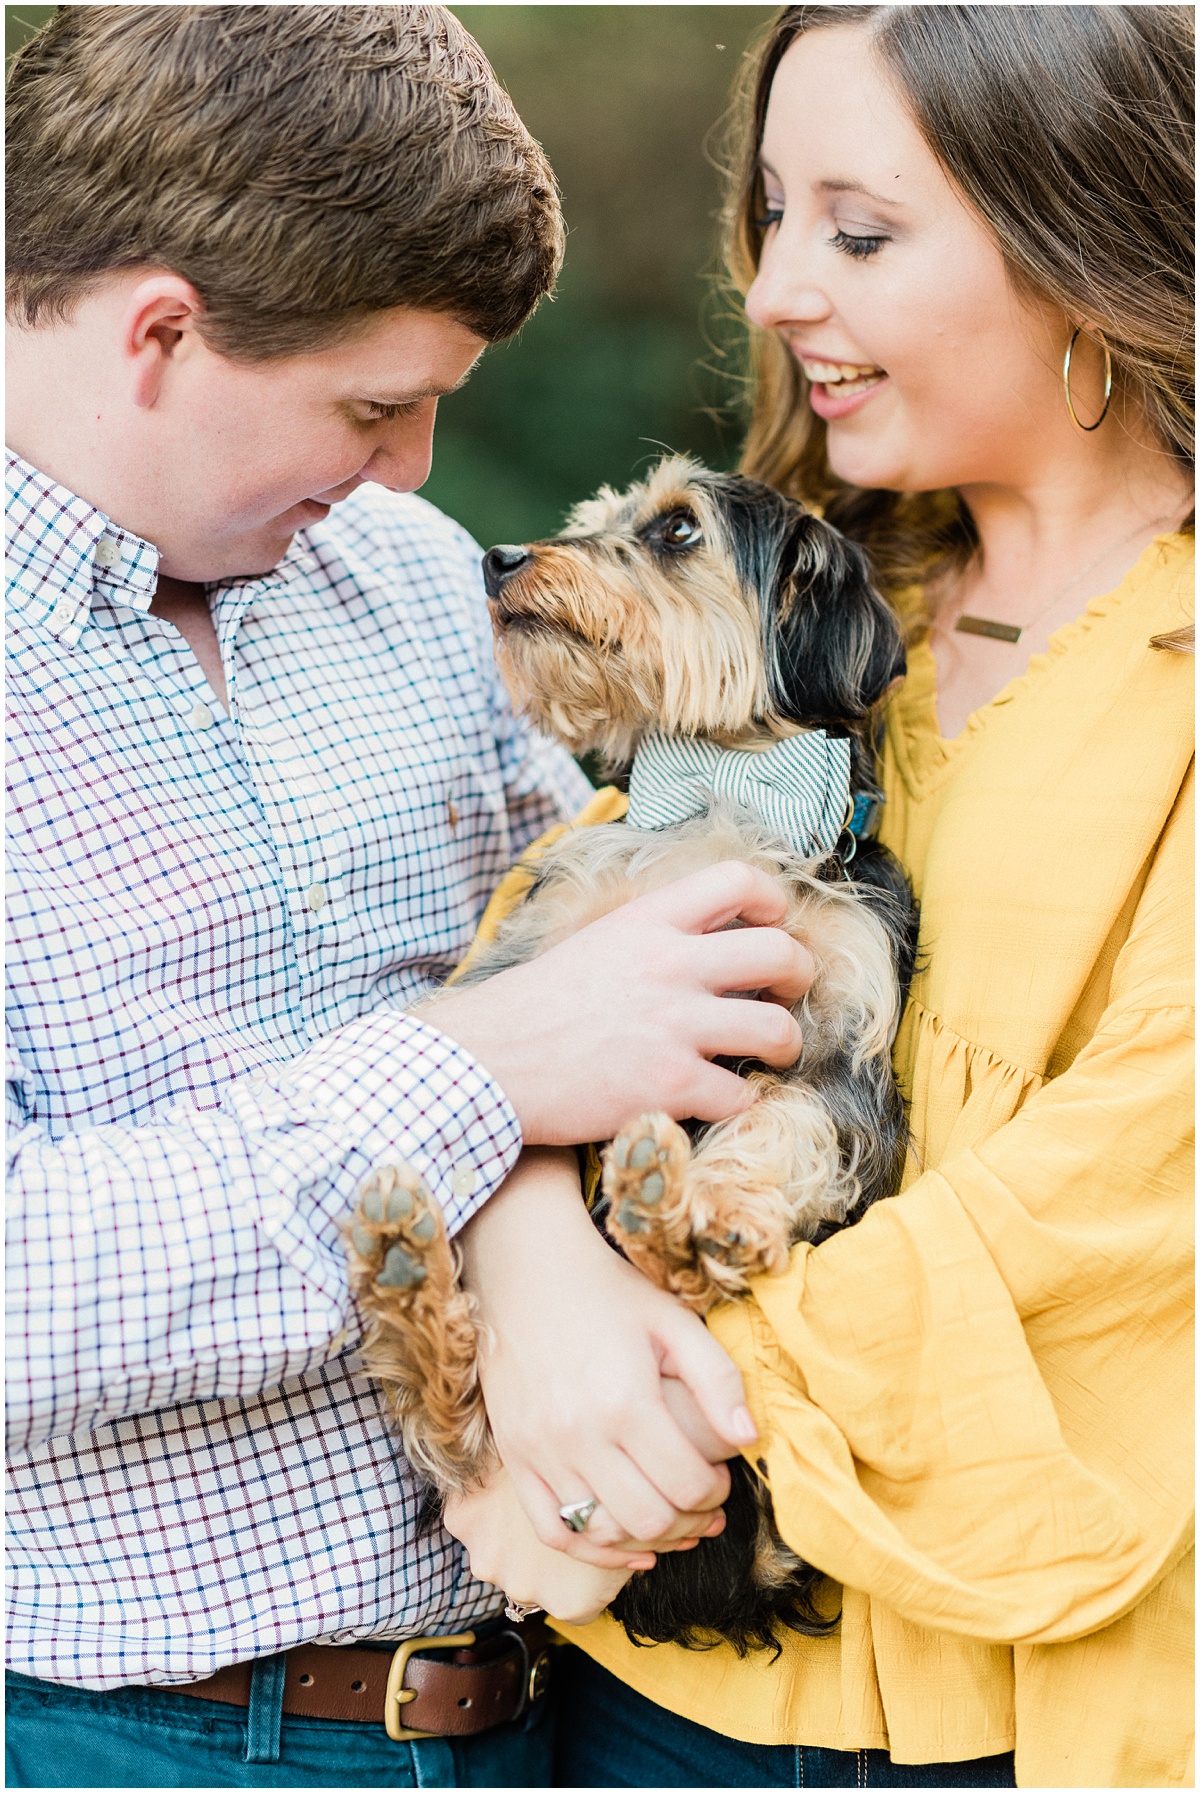 Engagement photo with dog and bow tie